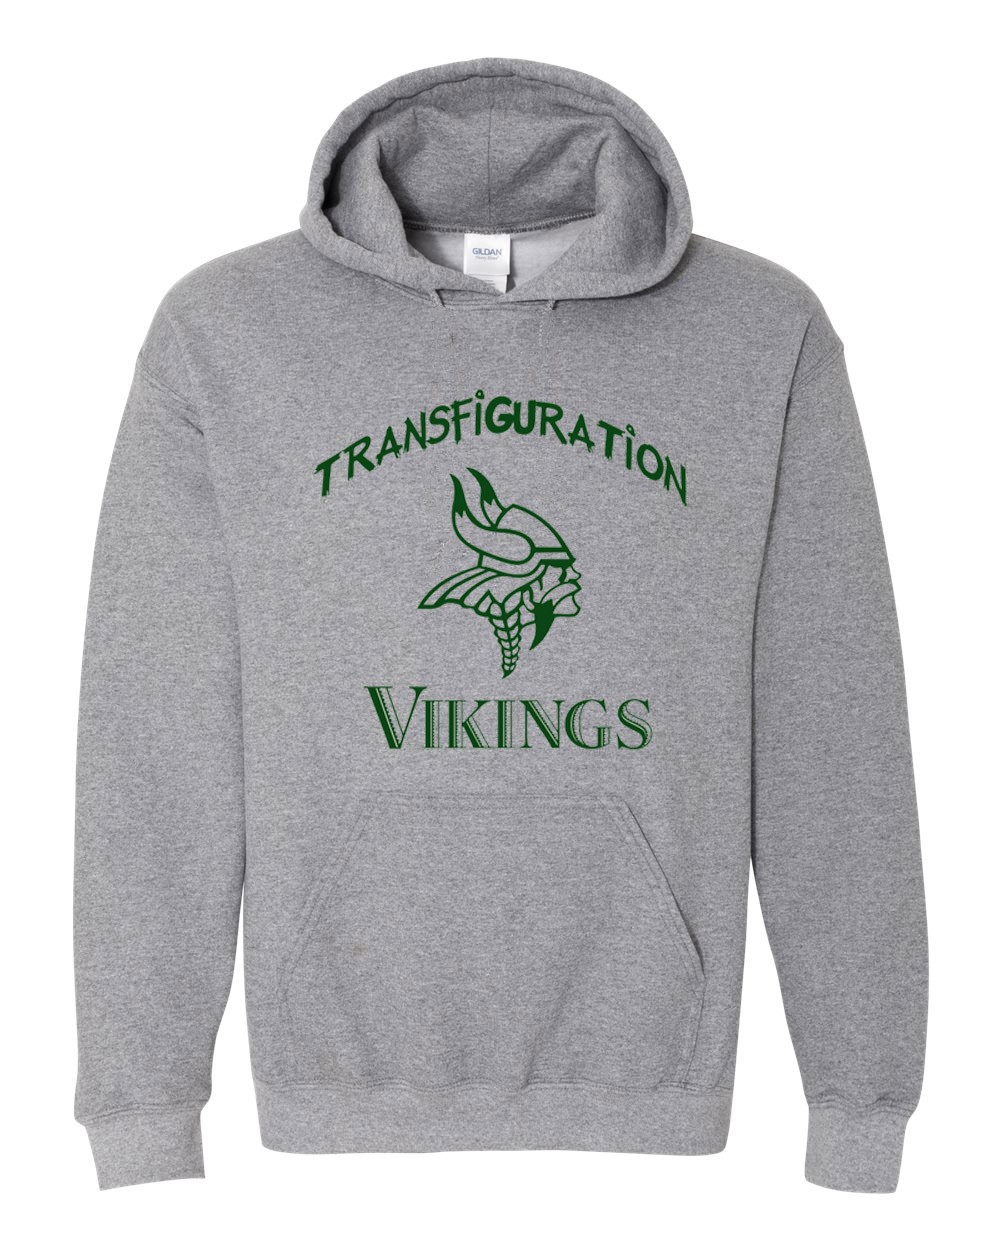 STAFF Transfiguration Wear Pullover Hoodie w/ Logo - Please Allow 2-3 Weeks for Delivery